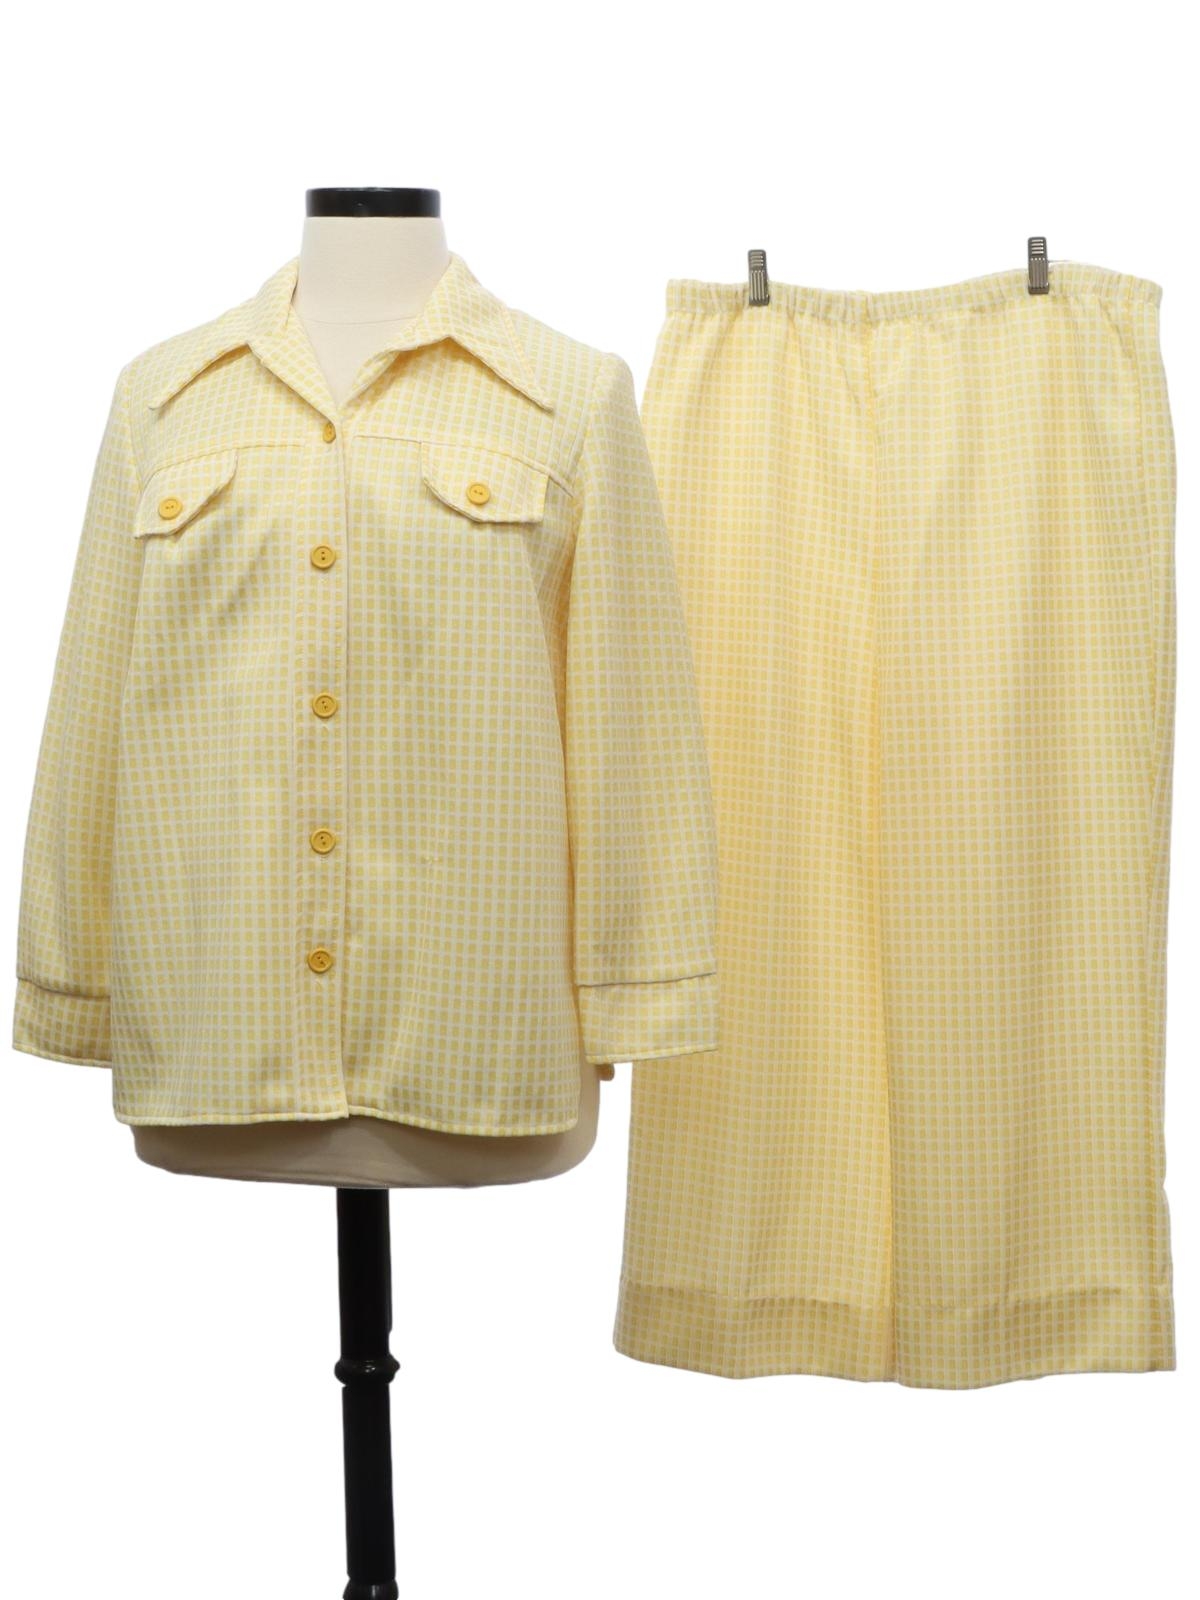 Retro 70's Leisure Suit: 70s -Fabric Labels- Womens sunny yellow and ...